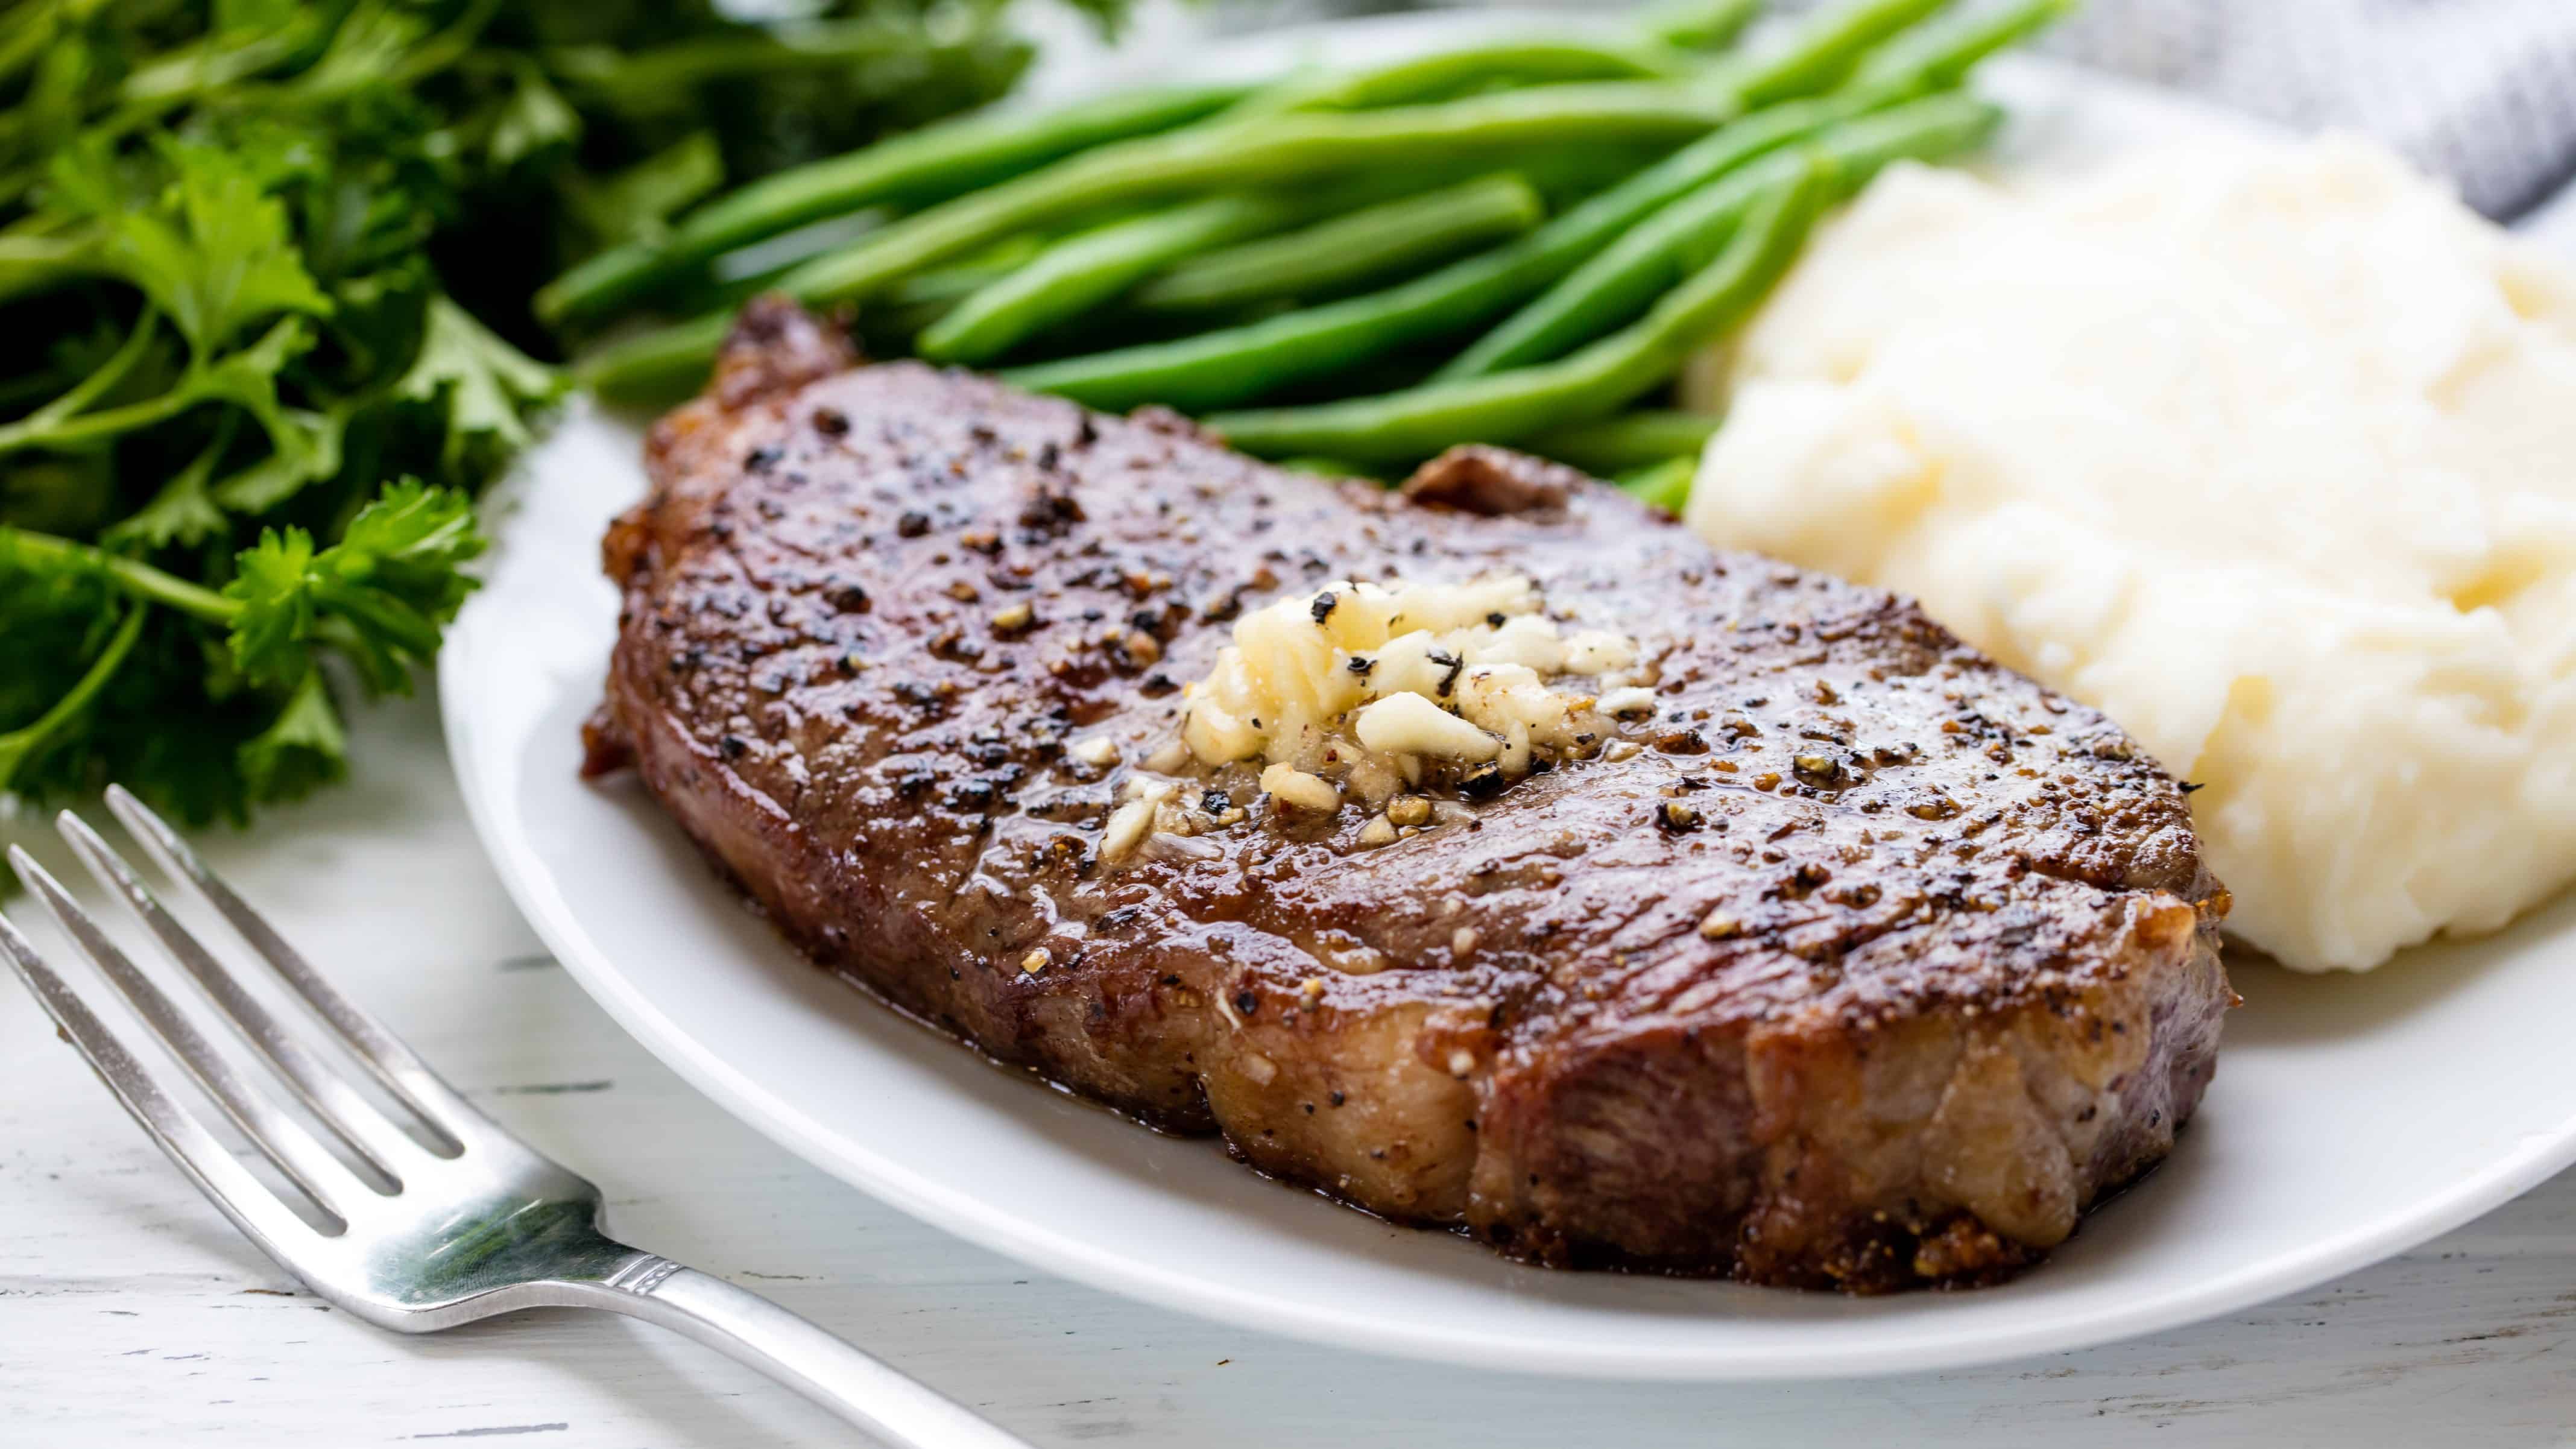 A juicy seasoned steak topped with a pat of butter and served with mashed potatoes and green beans on a plate.